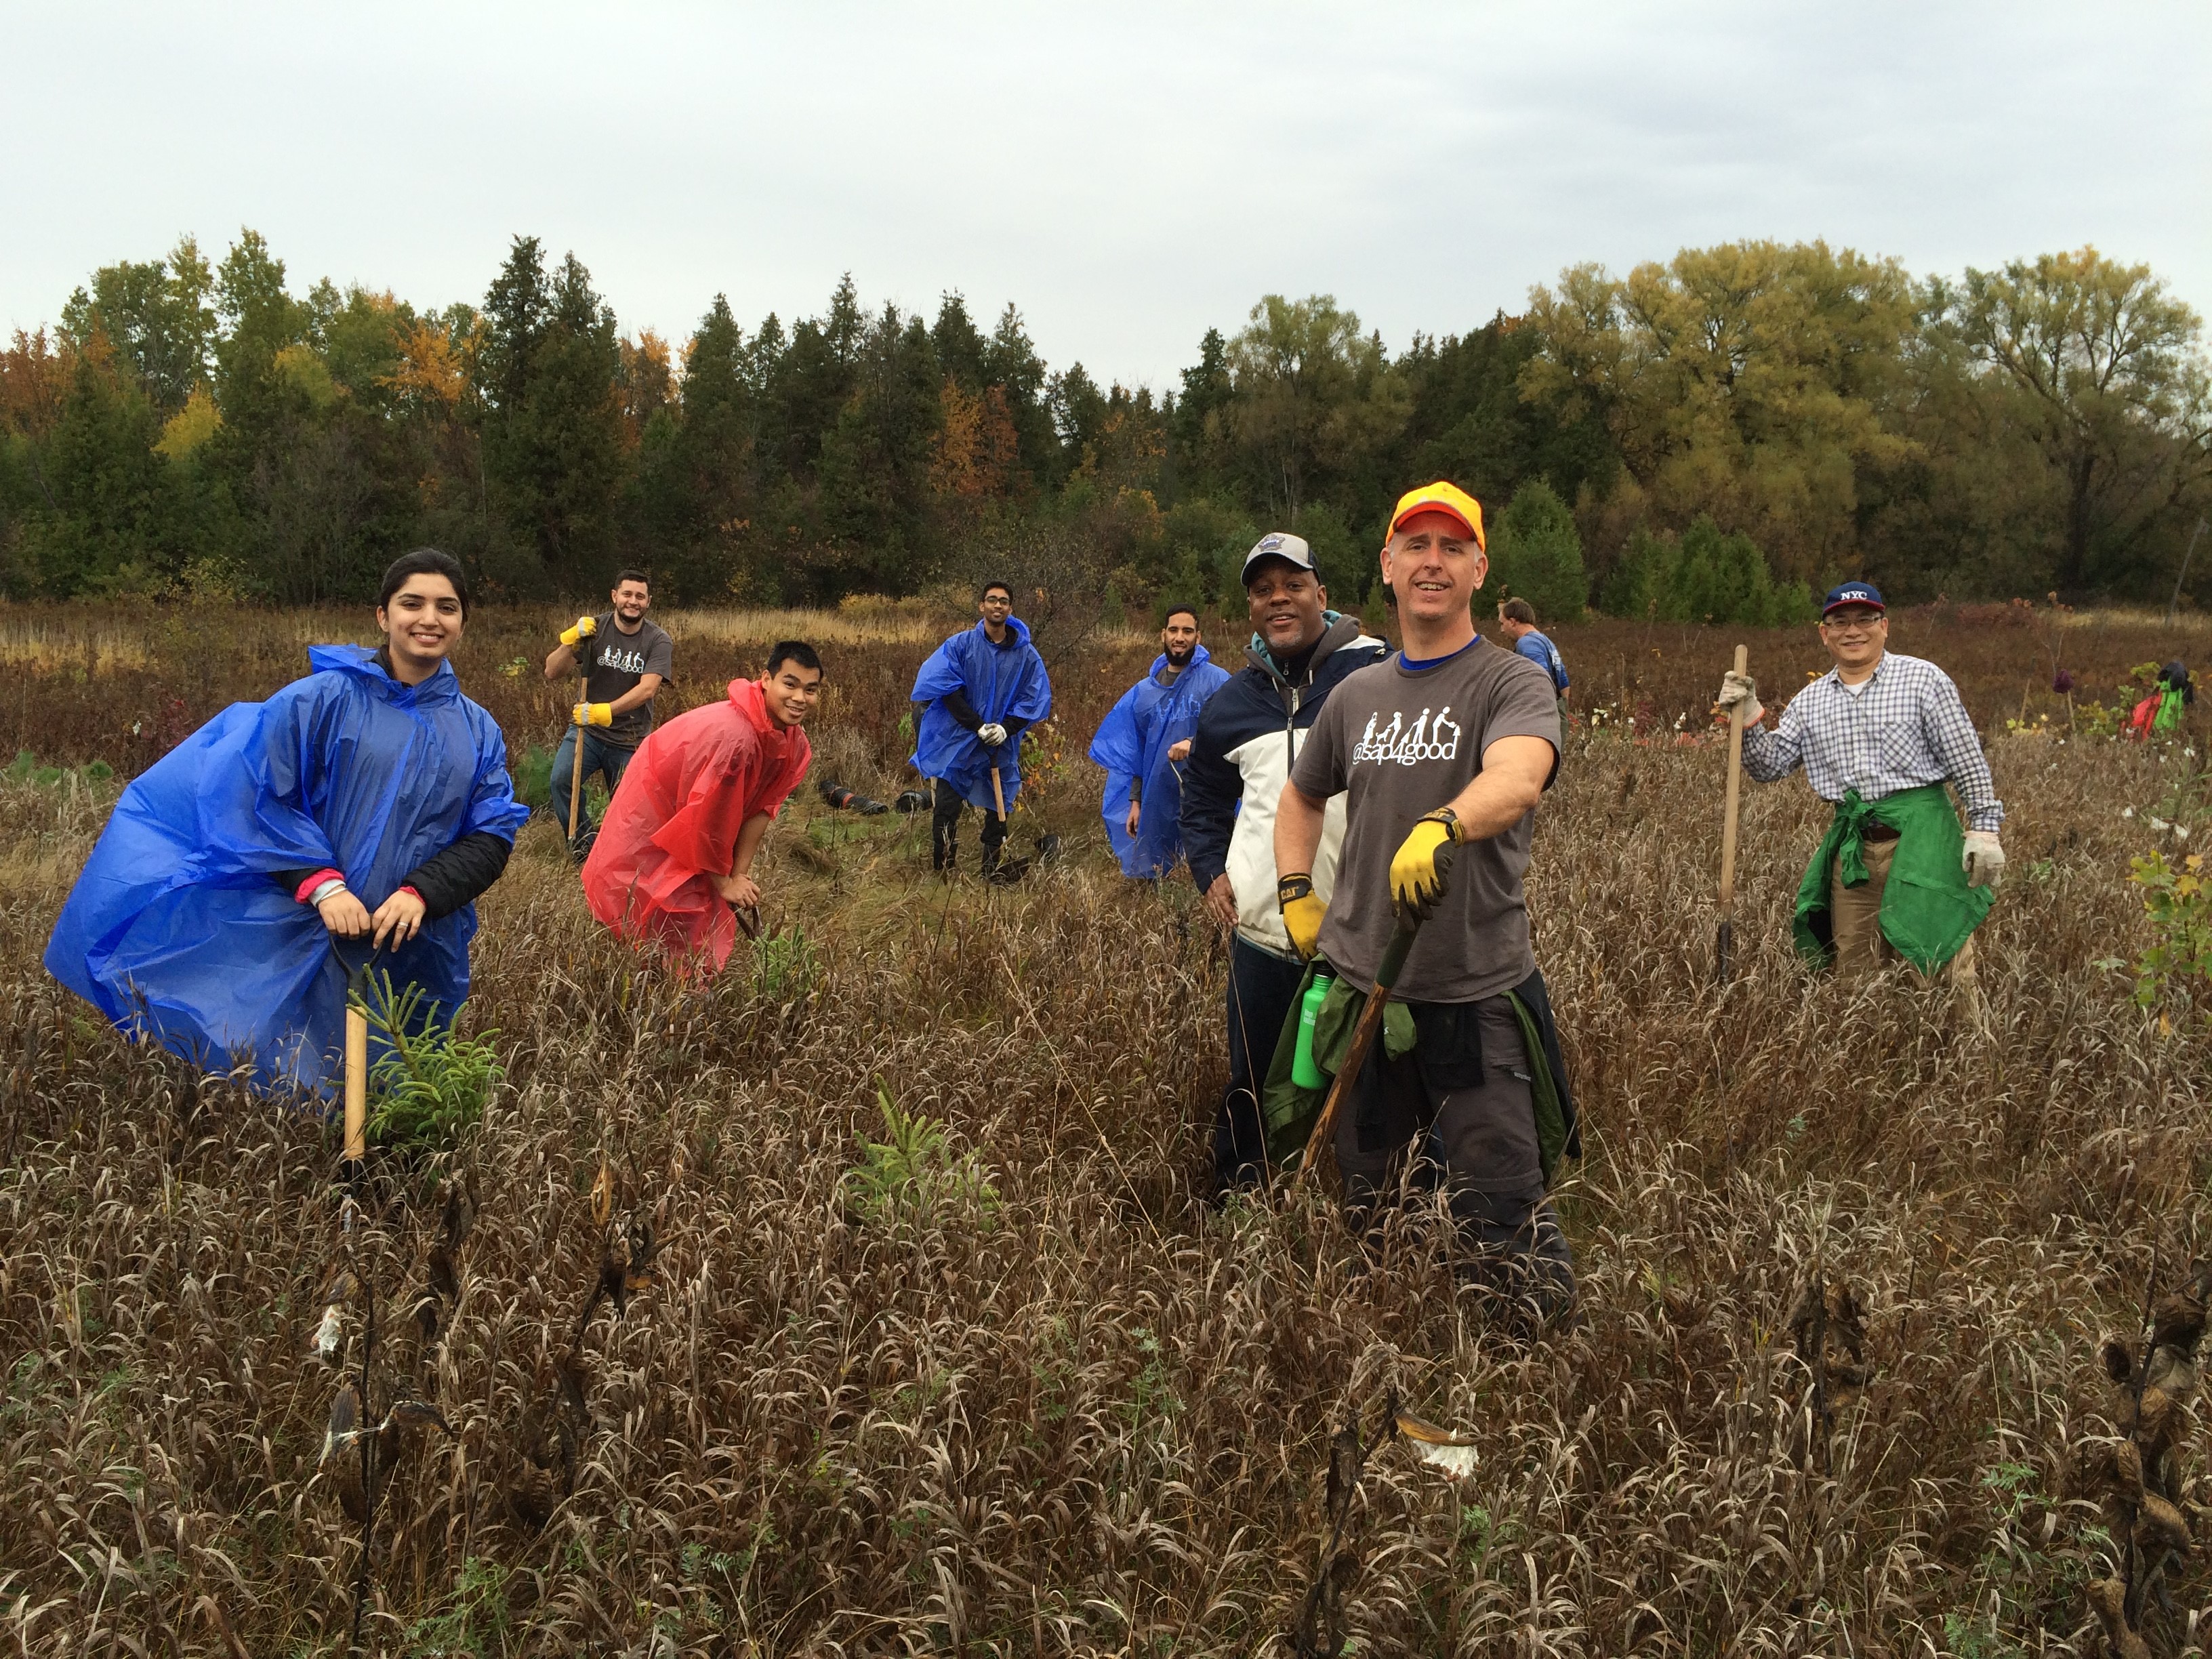 SAP Canada employees planting trees with Ontario Streams